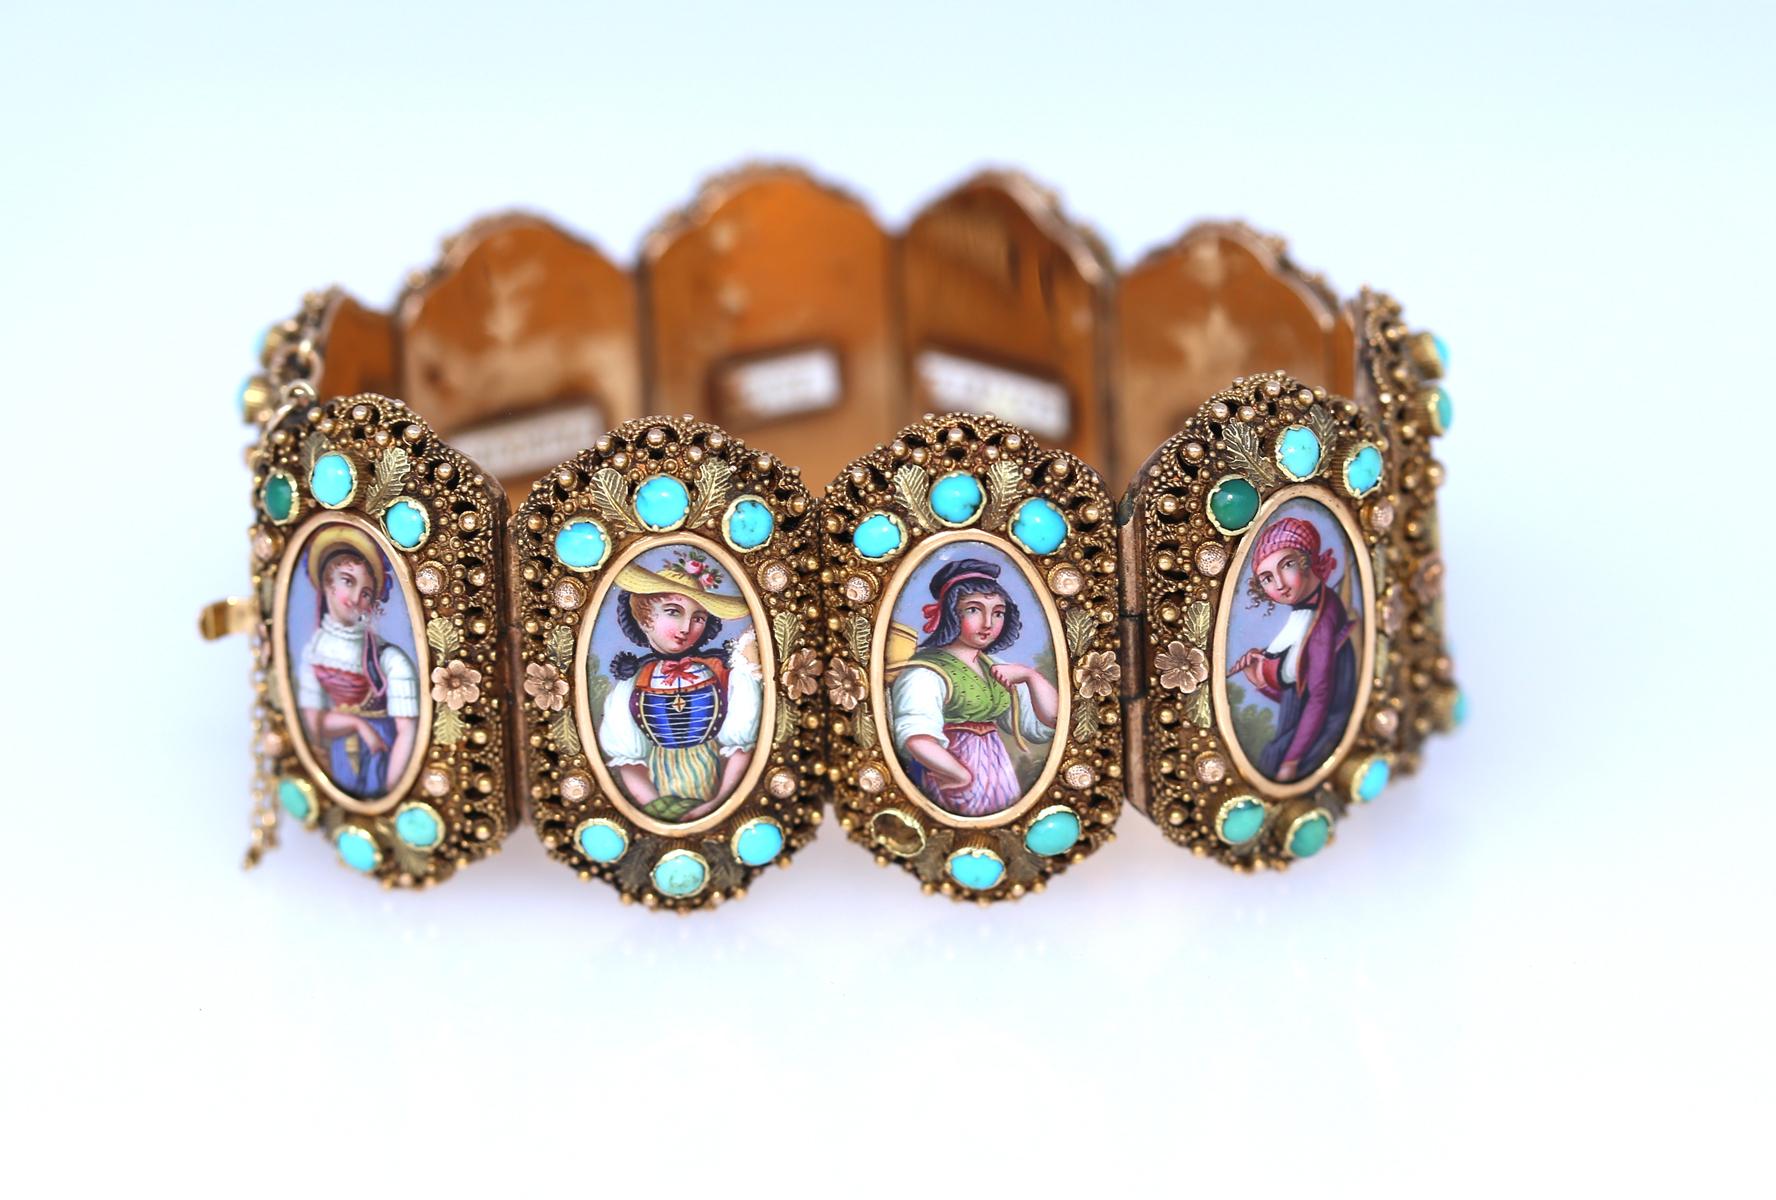 Swiss Cantons Turquoise Locket Gold Bracelet. Three-colour gold. Bracelet consists of oval hand-painted enamels depicting women in regional costumes of the Cantons of Switzerland. On the inner side of the bracelet, each of the pictures has the name